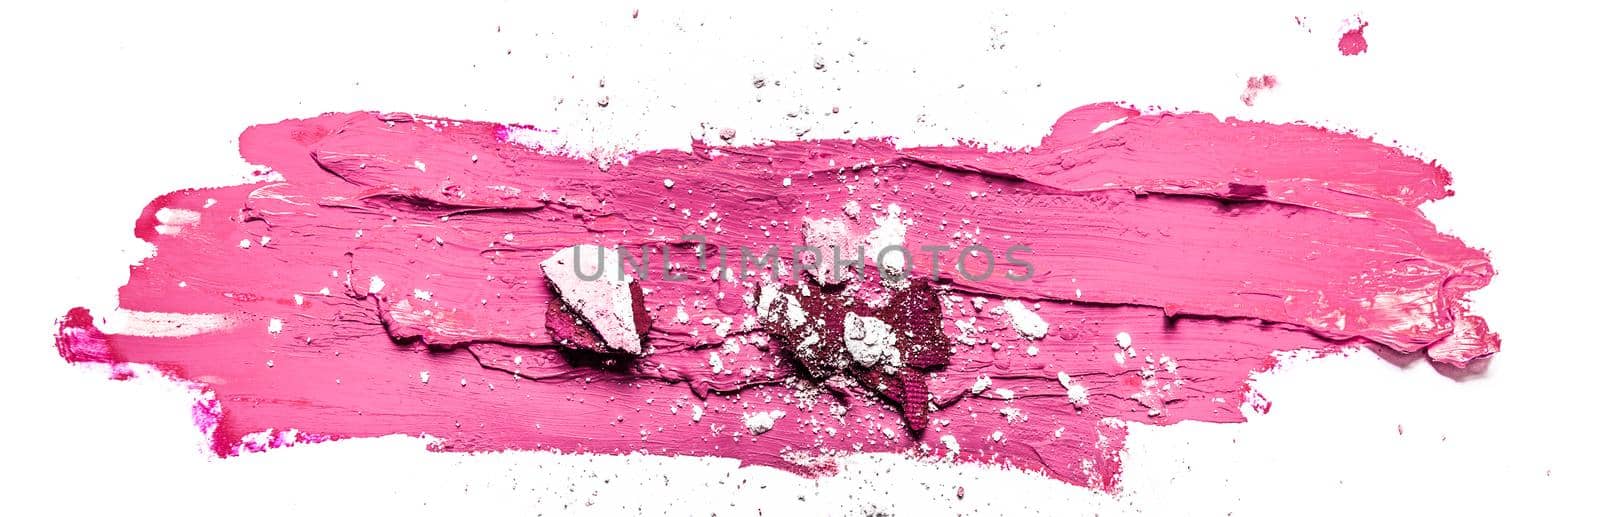 Artistic lipstick smudge and eyeshadow close-up isolated on white background by Anneleven